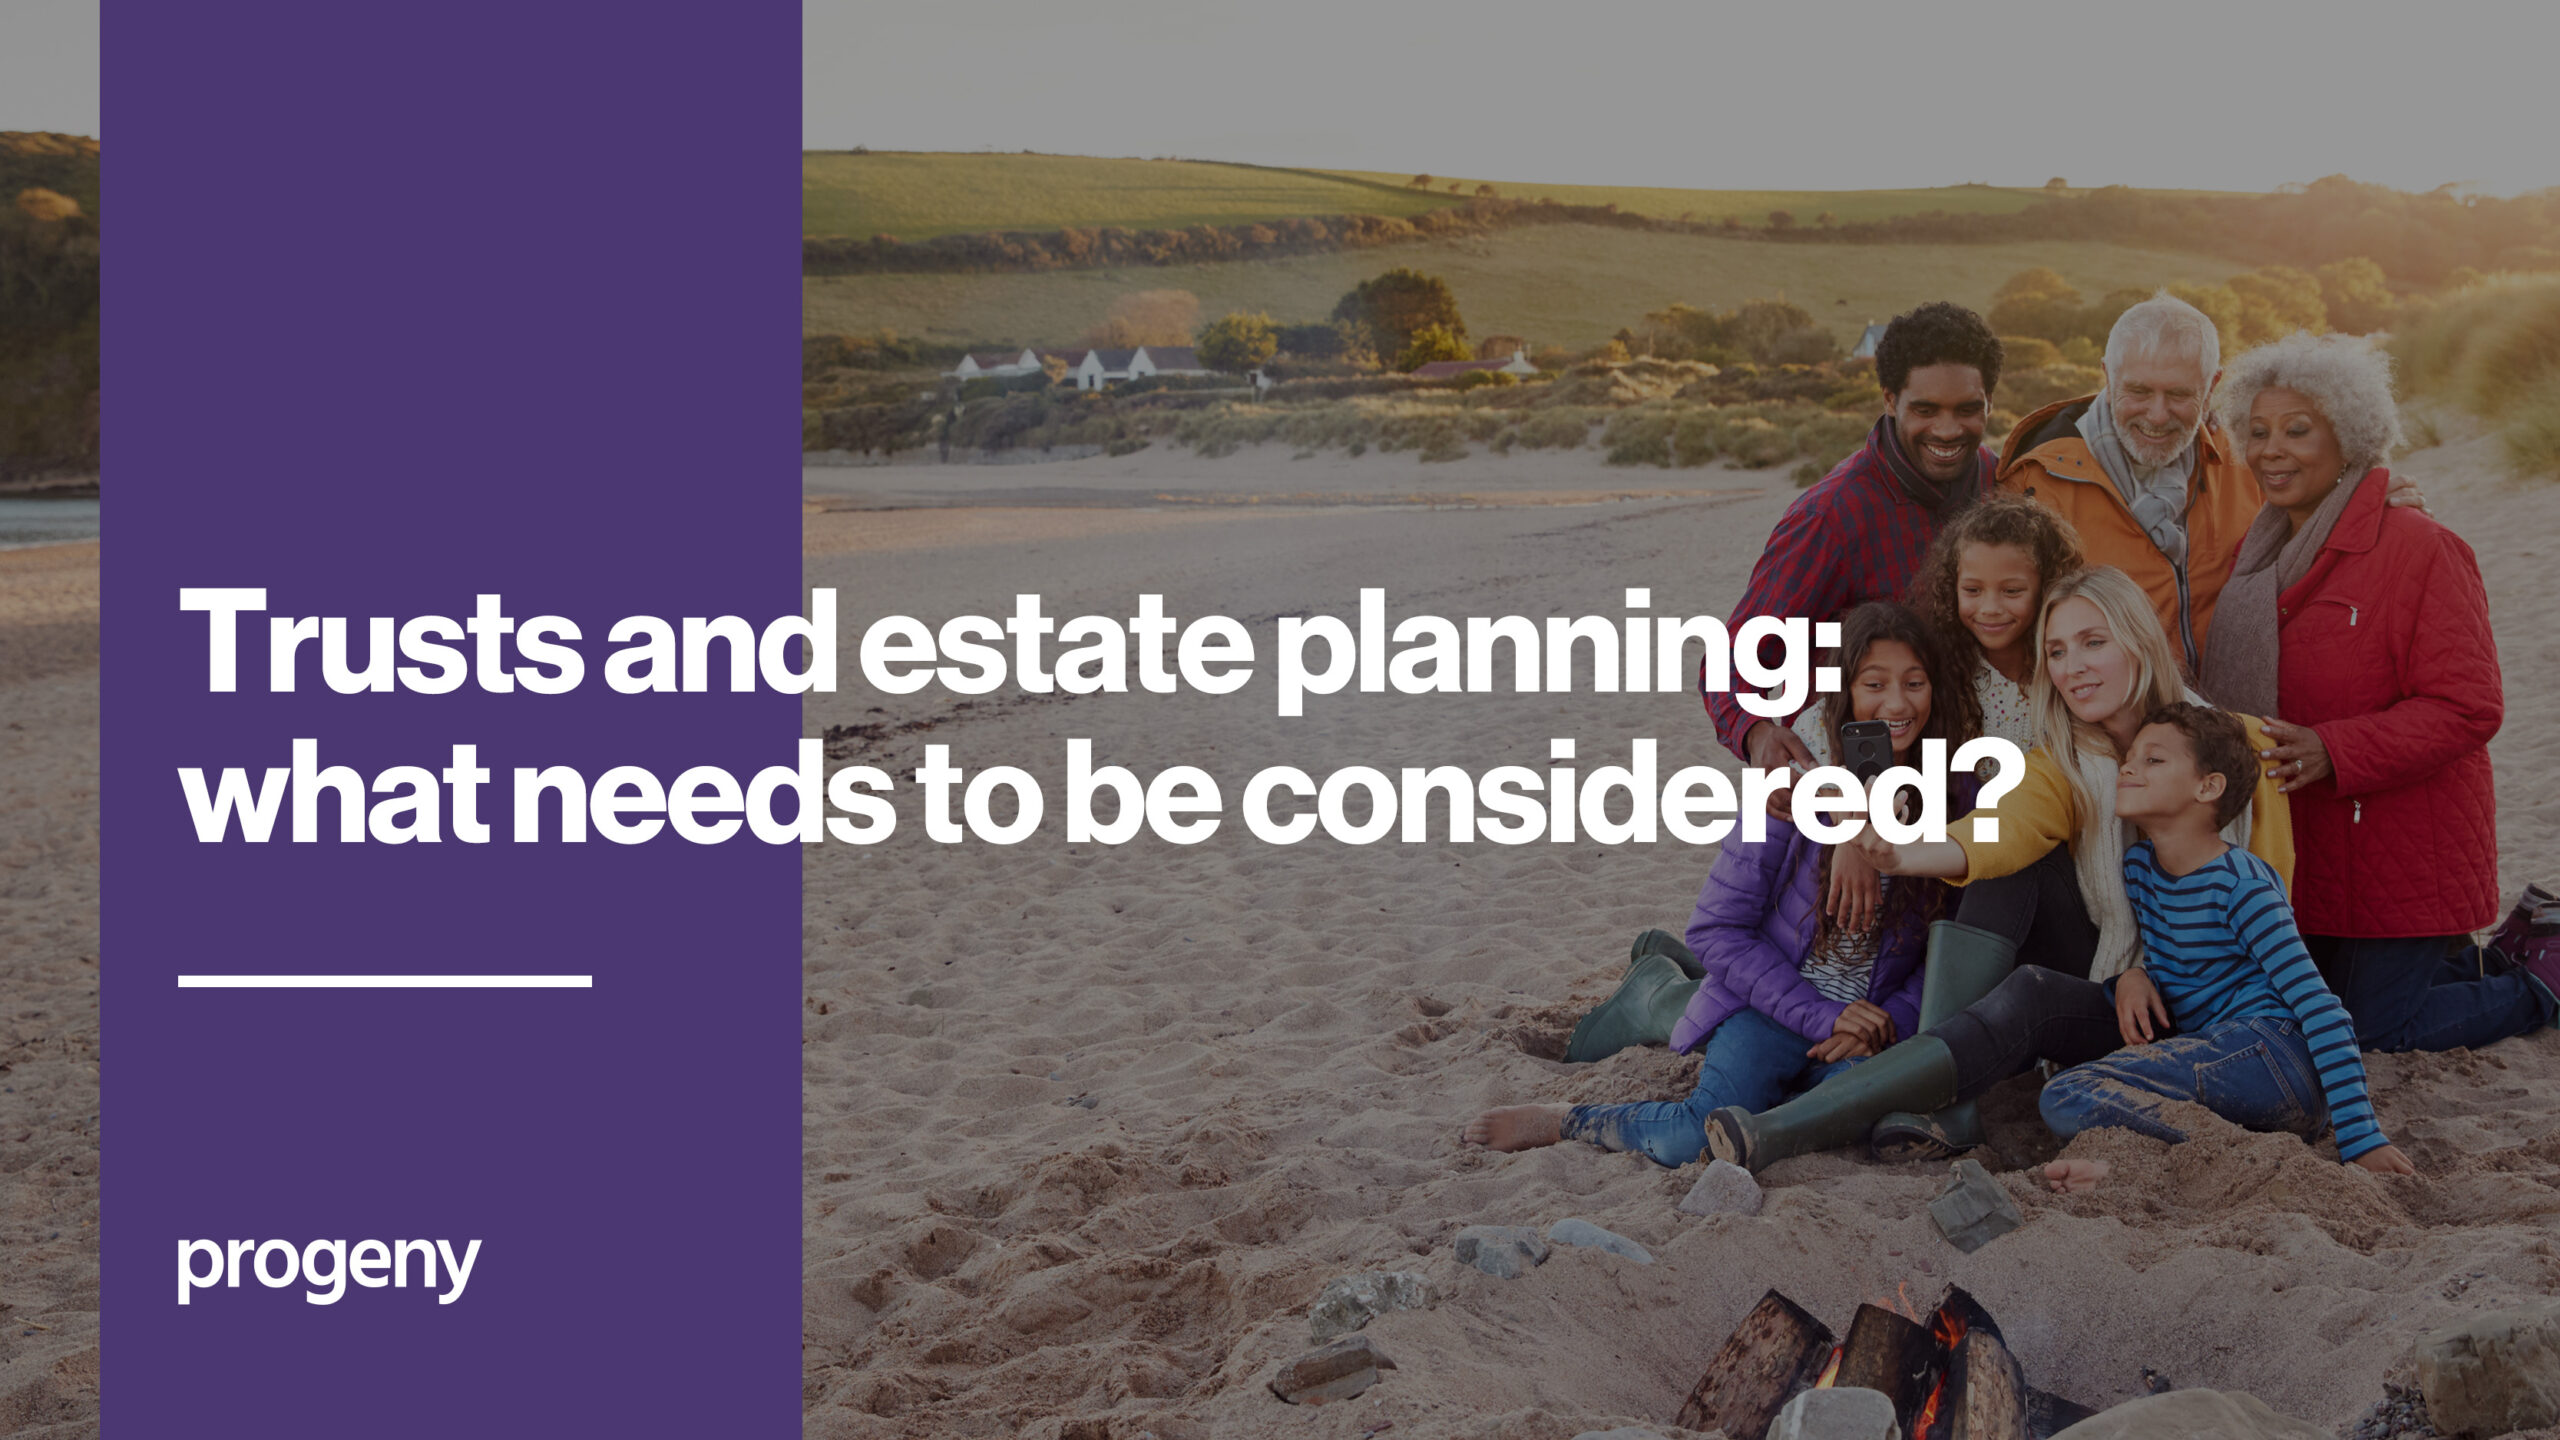 Trusts and estate planning- what needs to be considered?